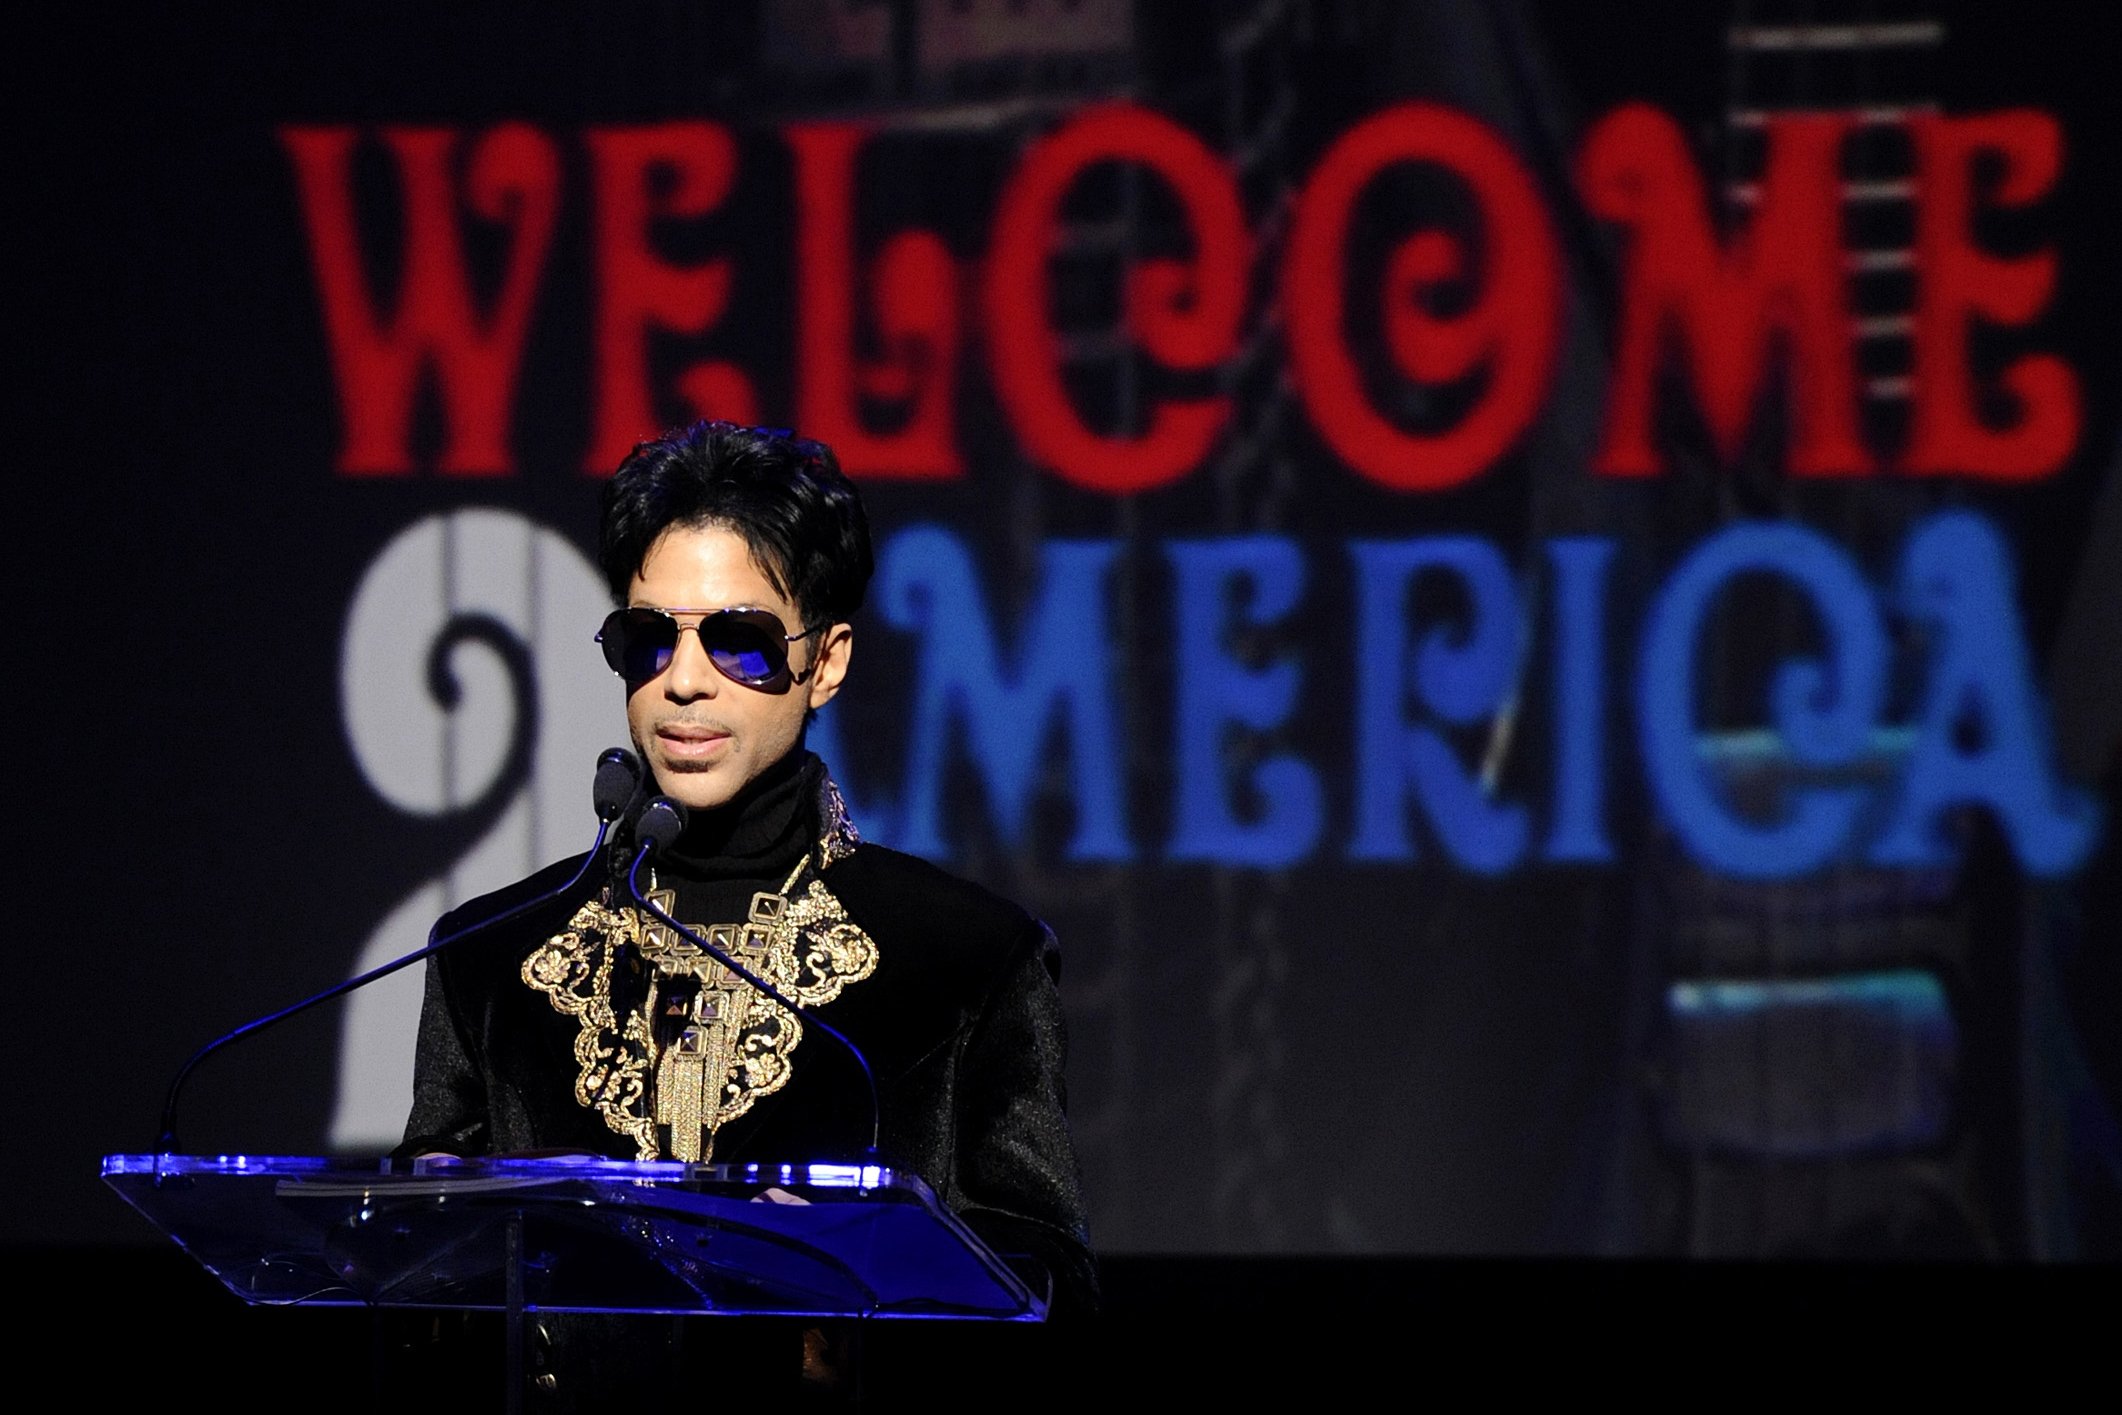 IRS says executors underestimated Prince’s assets by 50%